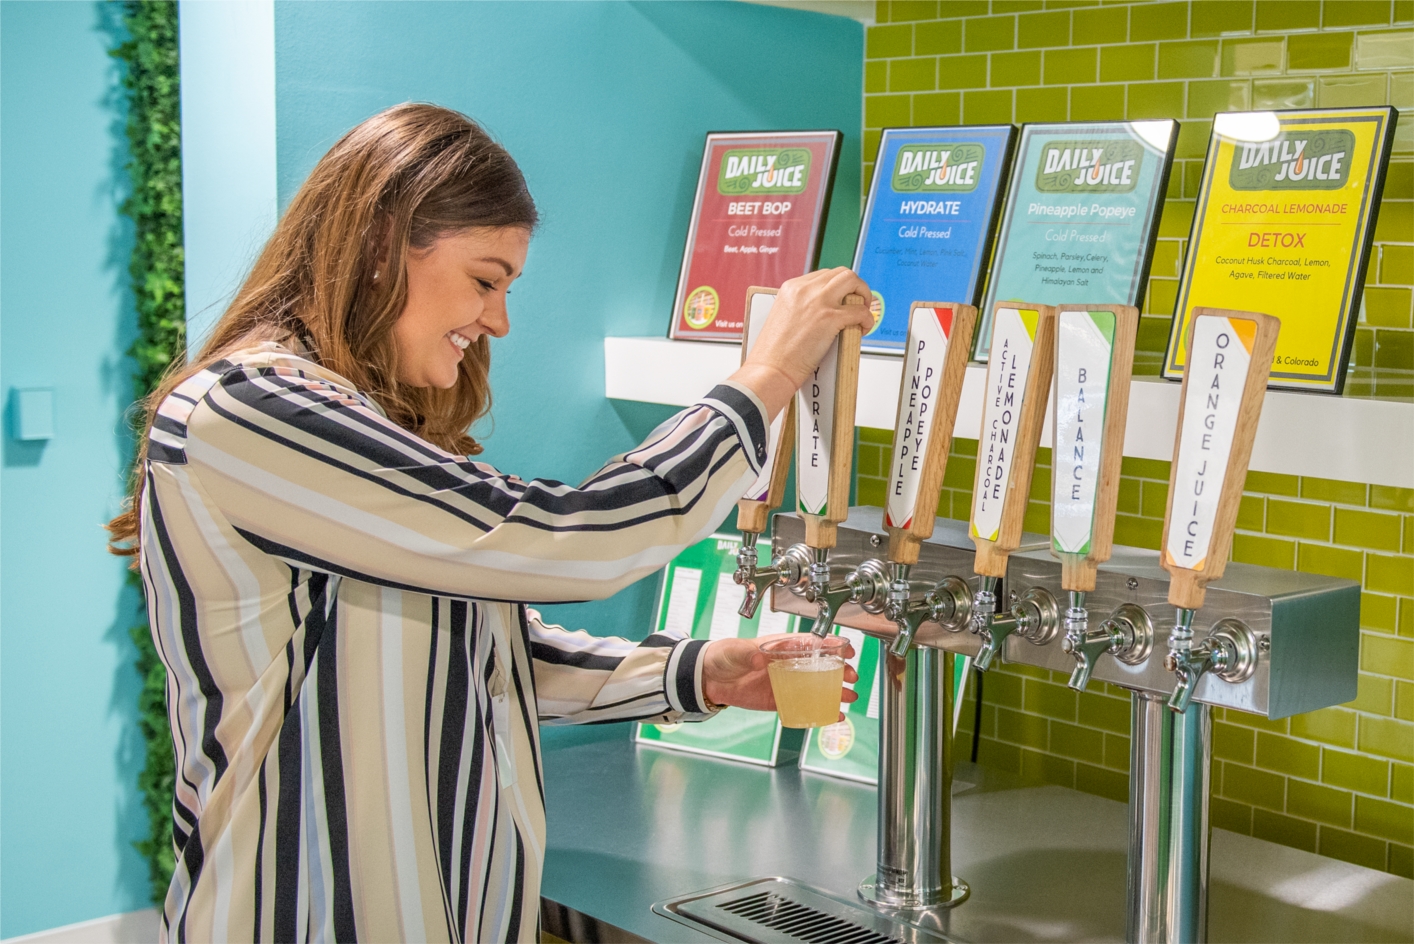 Perks at the RetailMeNot office in Austin include fresh Daily Juice on tap, catered lunches, and a coffee bar with full-service baristas. 